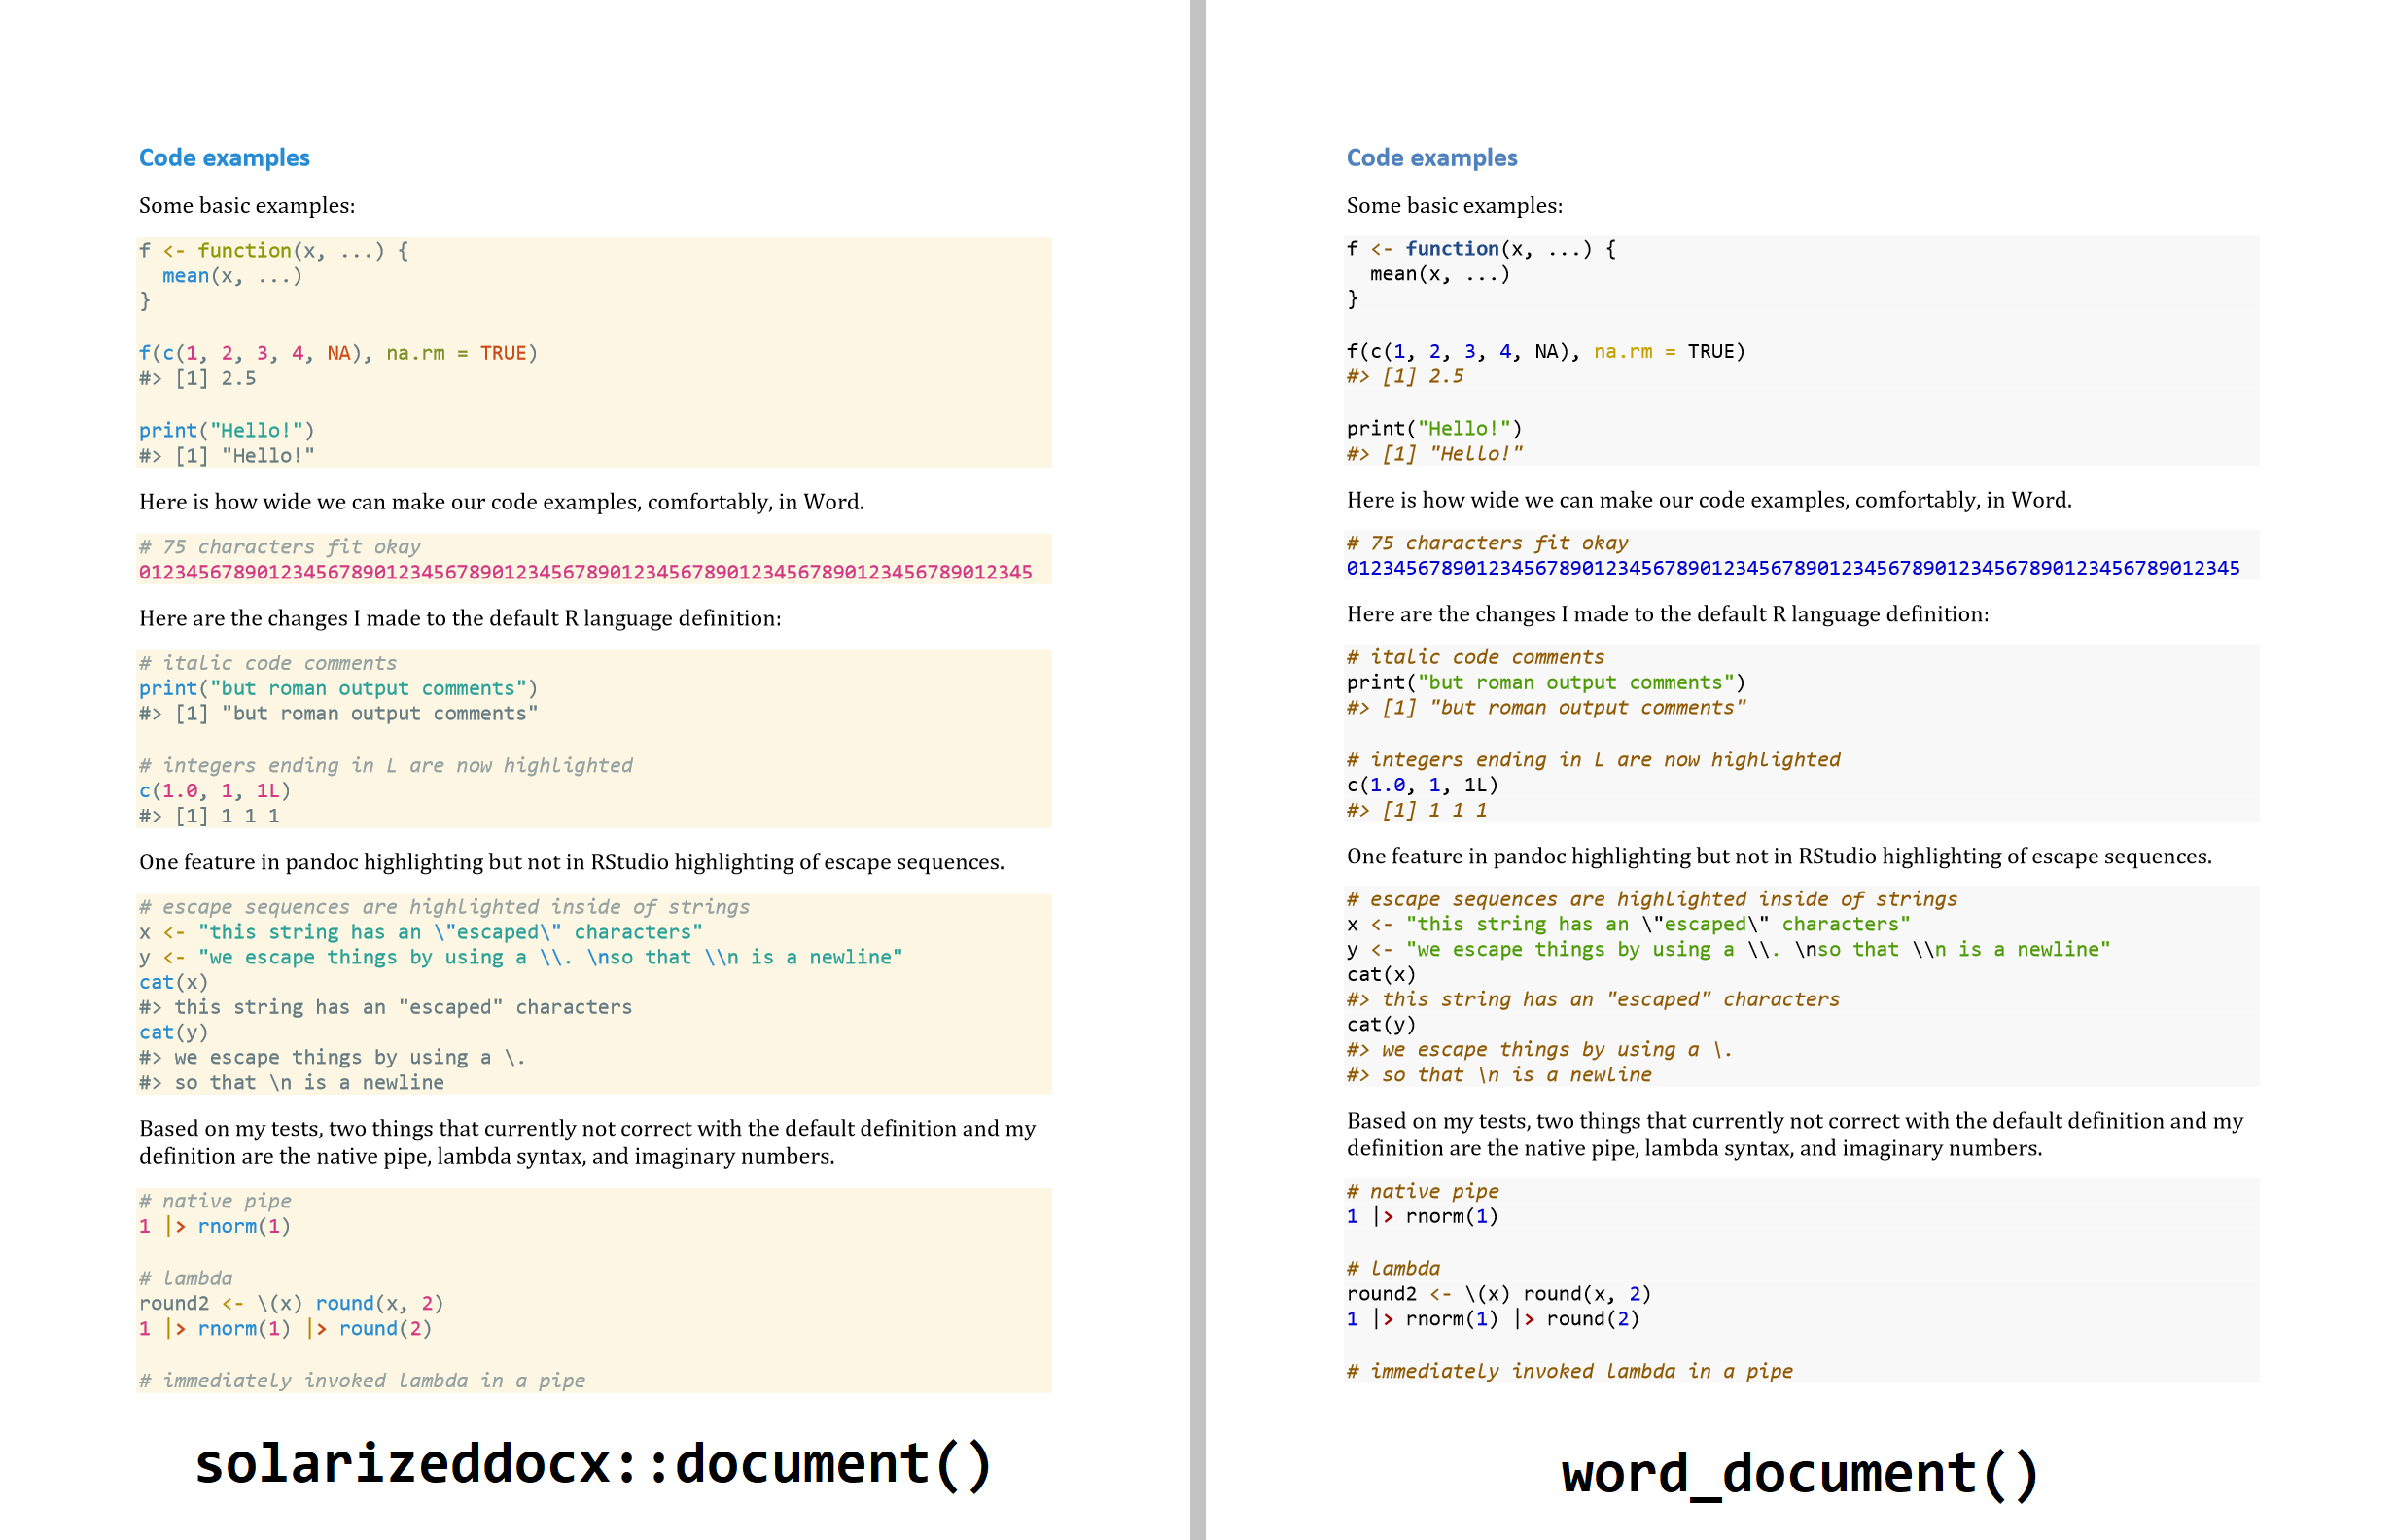 Side-by-side comparison of solarizeddocx::document() and rmarkdown::word_document()